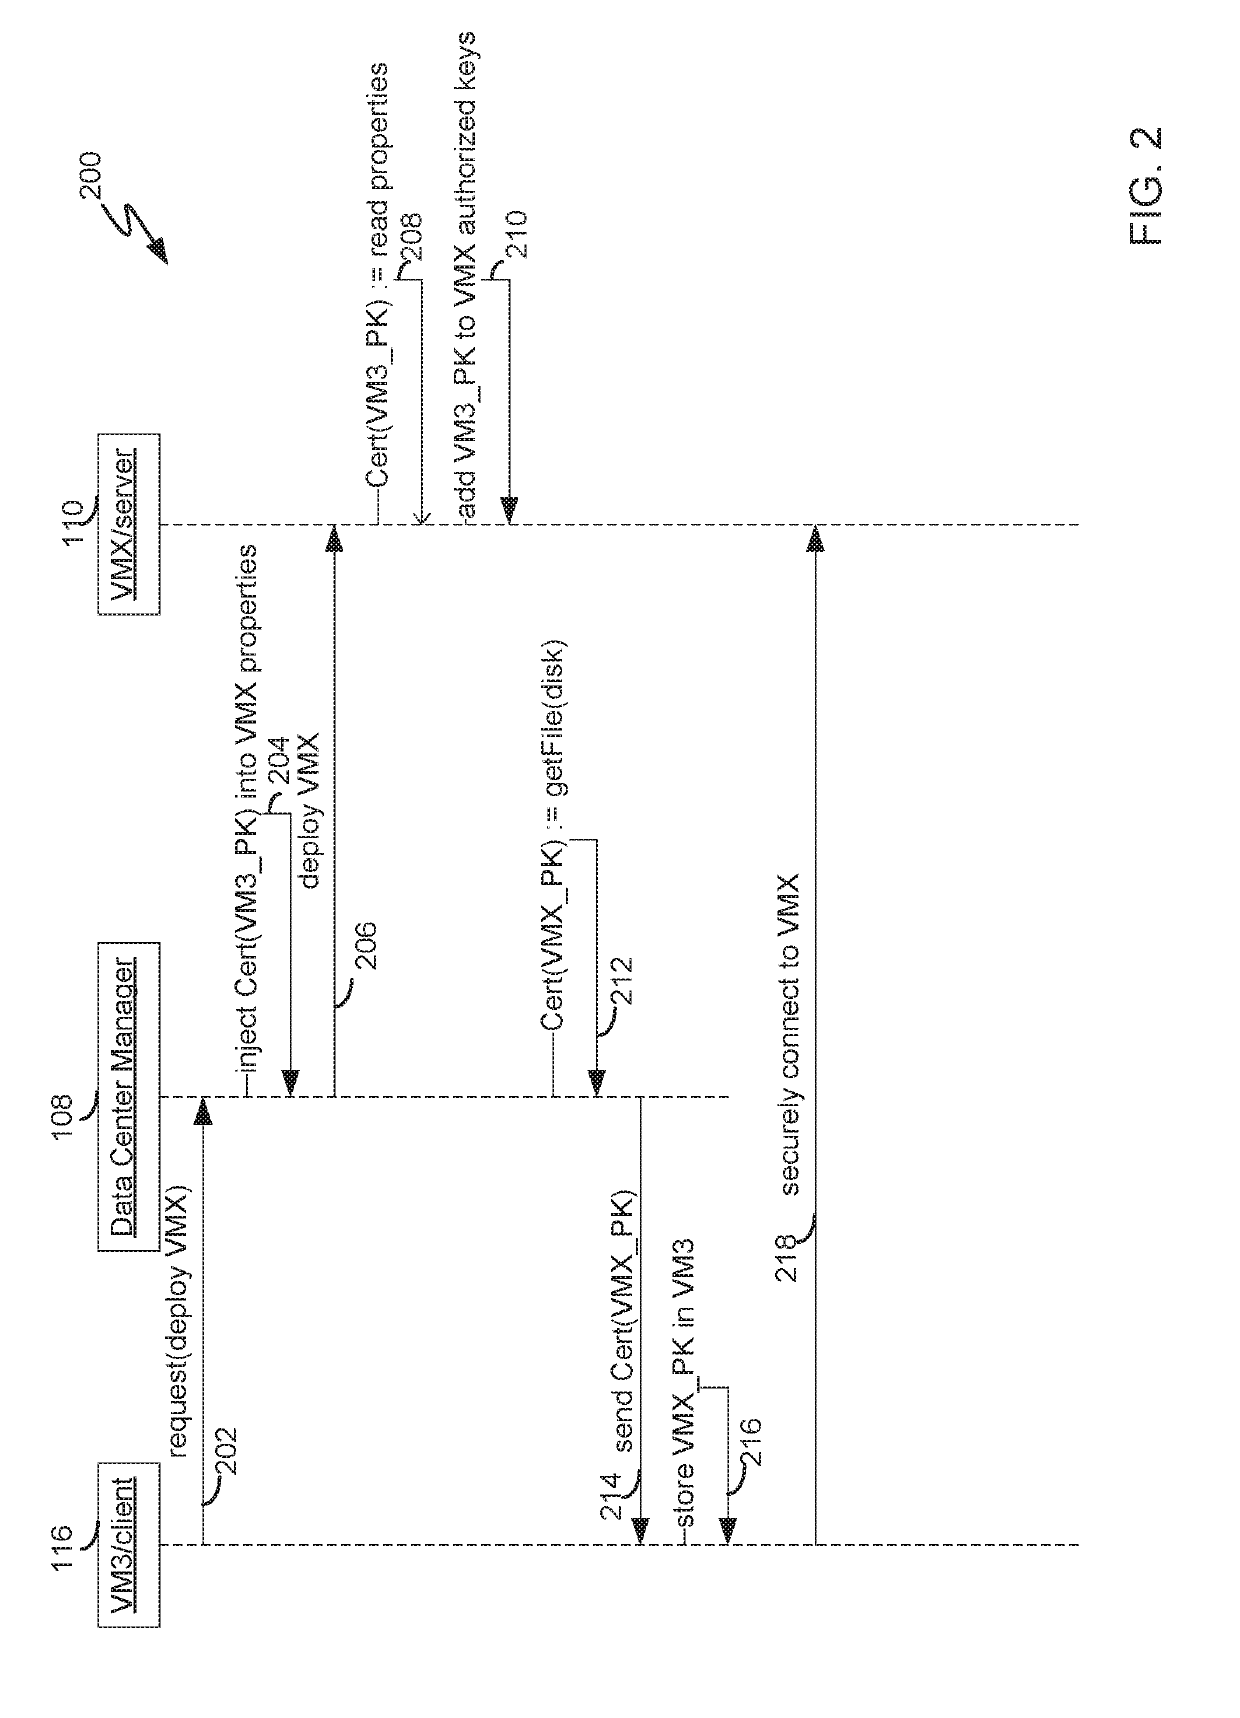 Automating establishment of initial mutual trust during deployment of a virtual appliance in a managed virtual data center environment